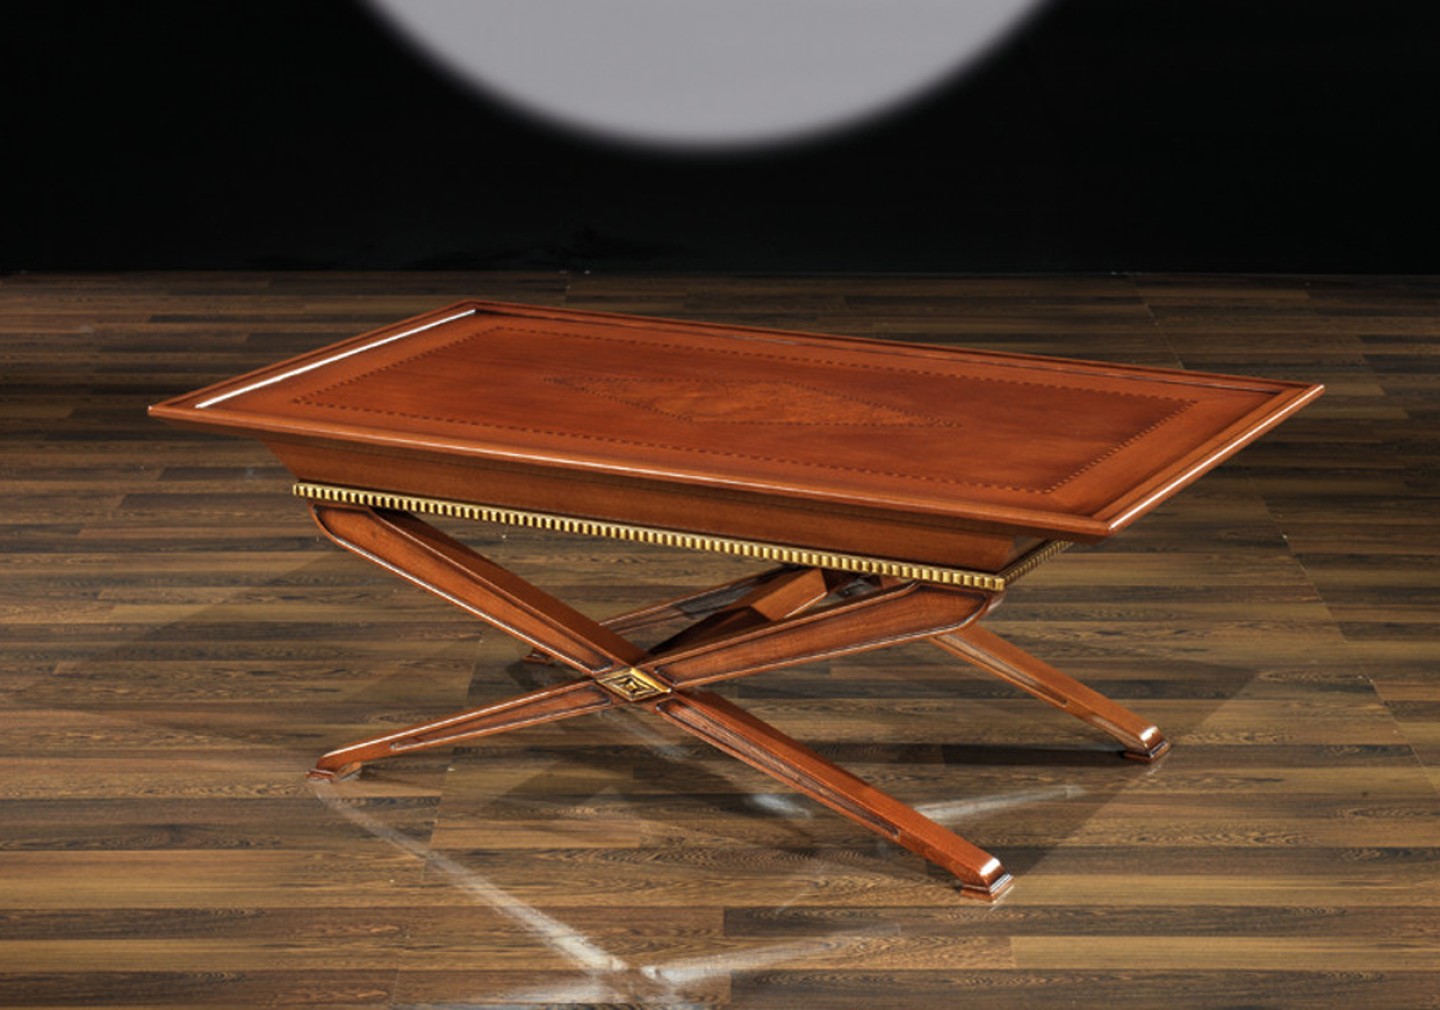 THE IONA CLASSIC COFFEE TABLE